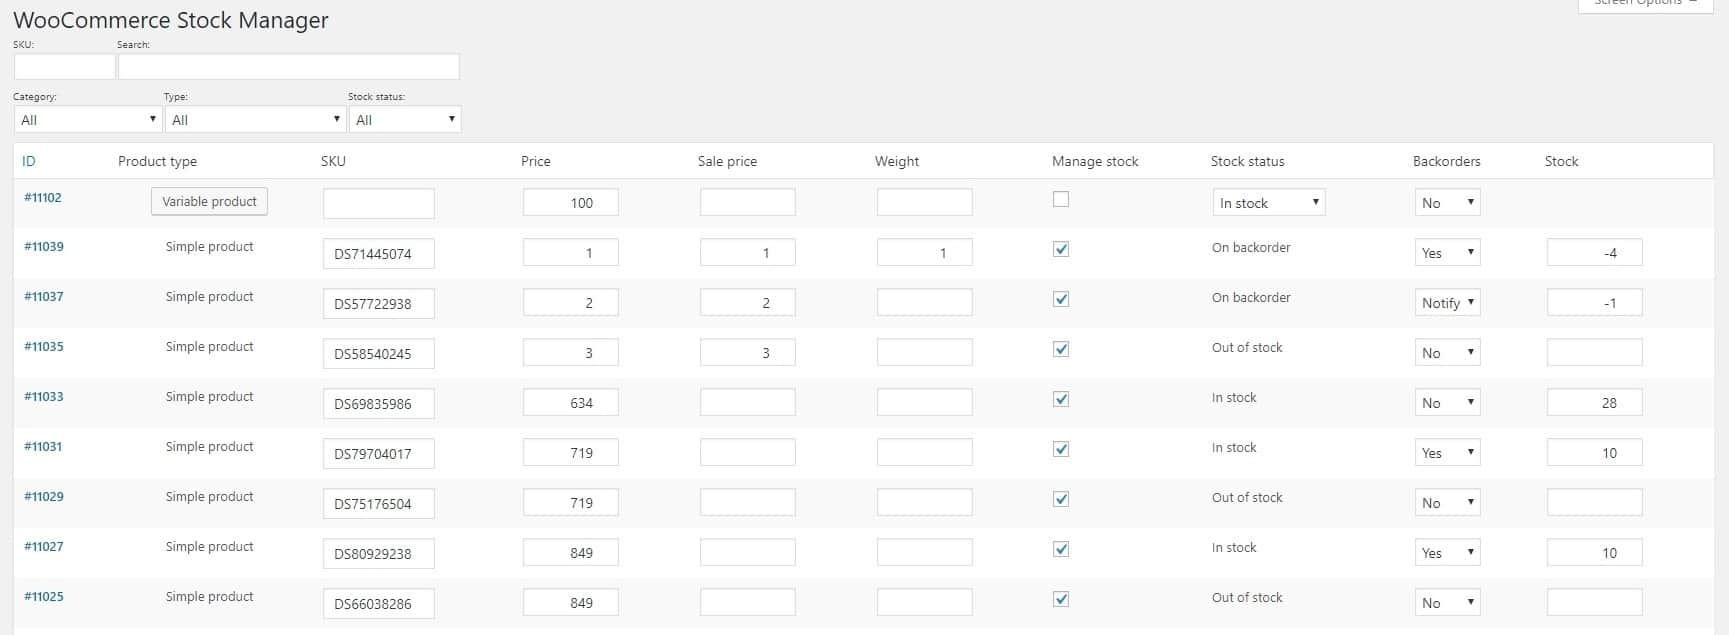 woocommerce stock manager plugin dashboard